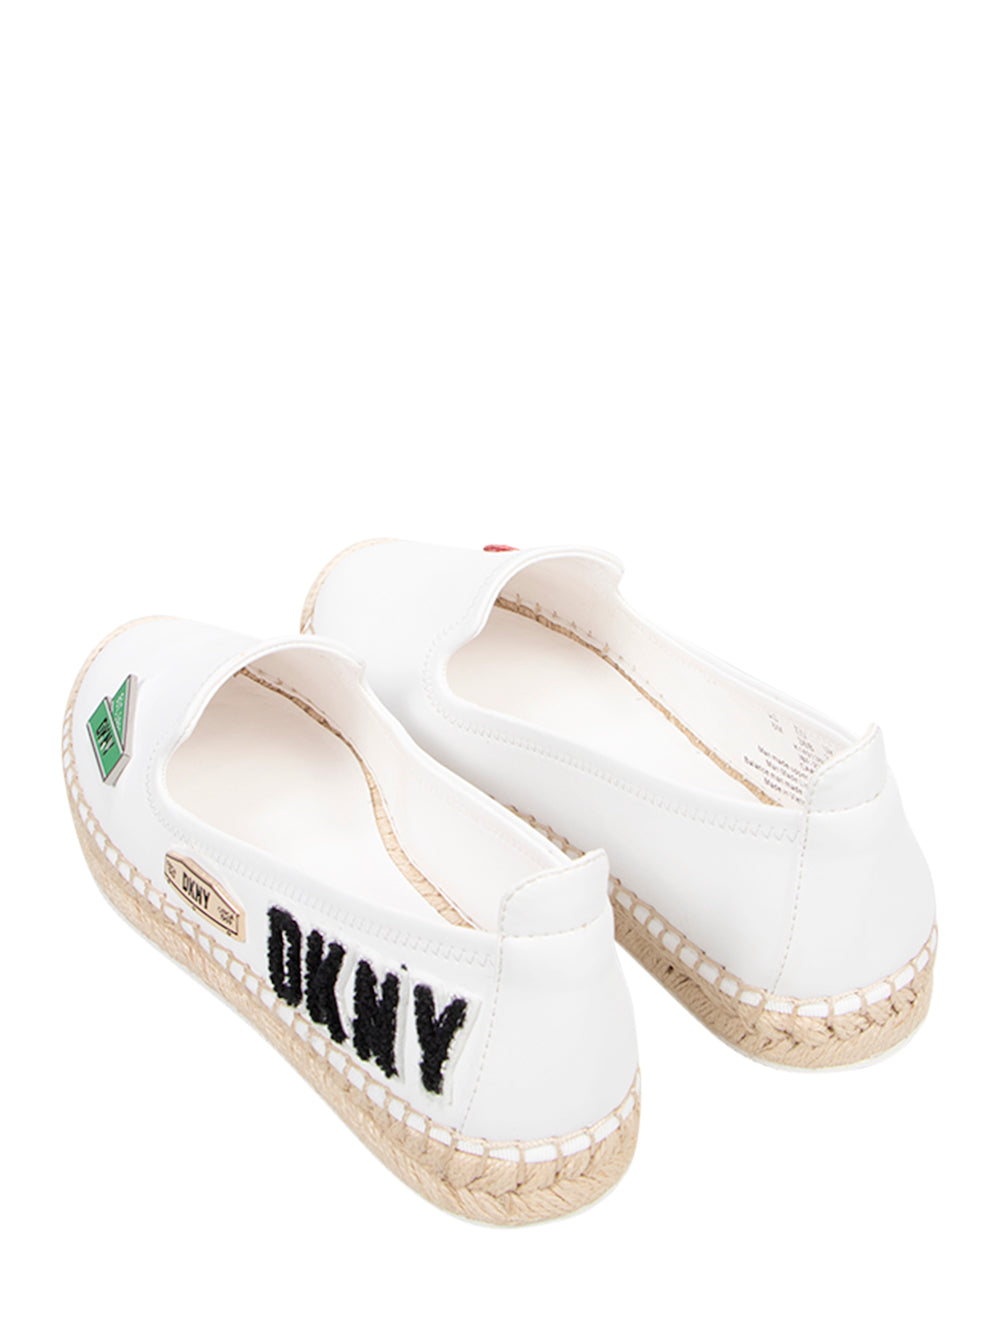 Mally City Signs - Espadrille Bright White